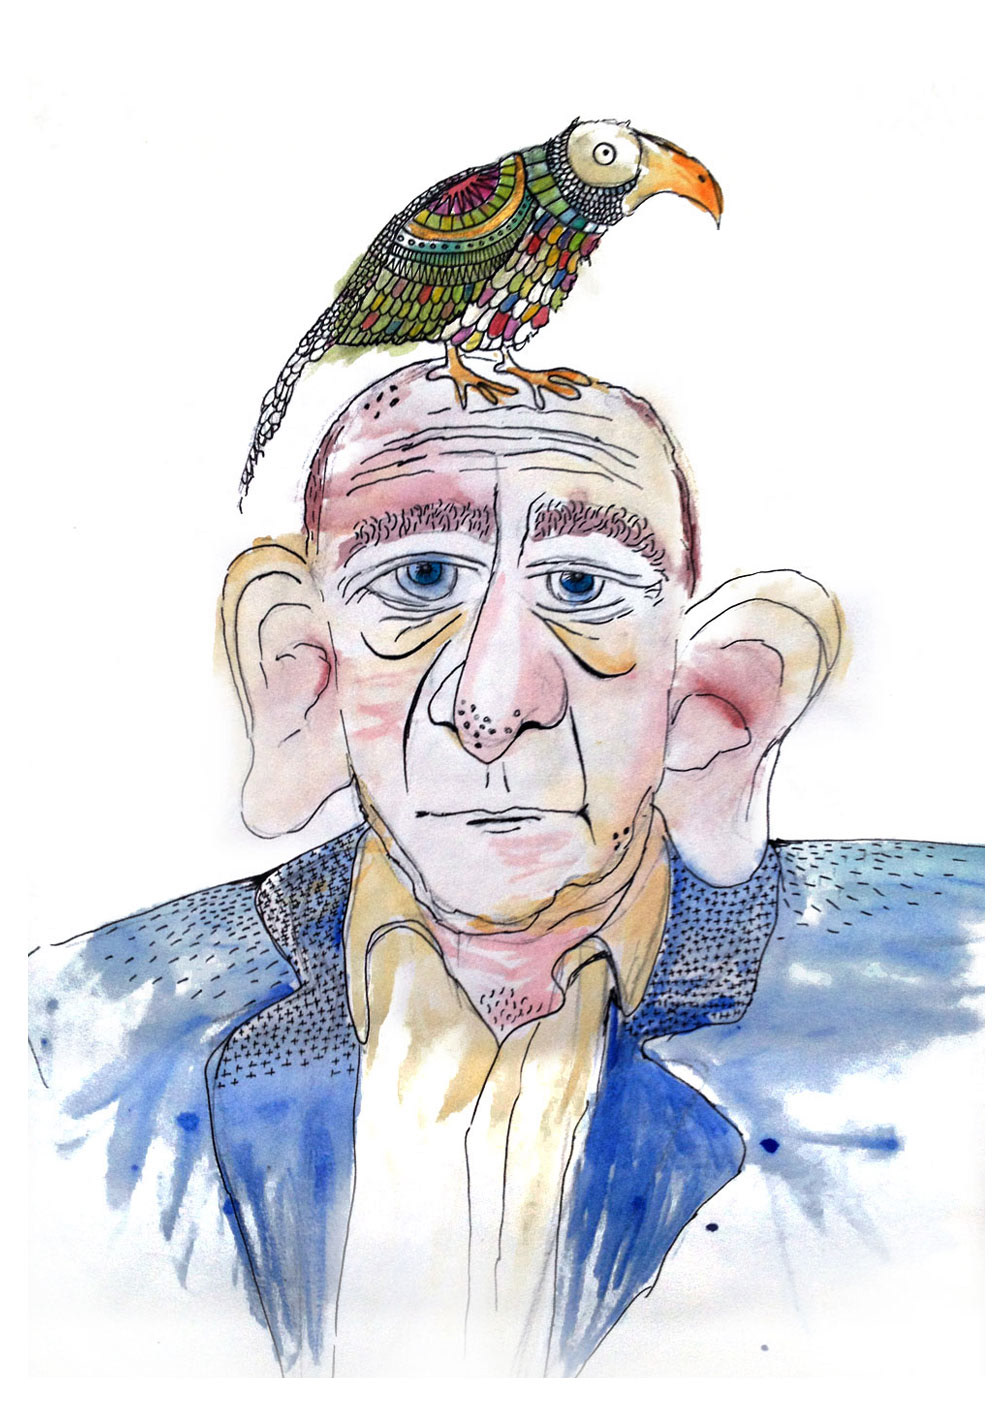 watercolour watercolor paint illustrate girl handdrawn gangsters elephant bird oldman man characters caricatures